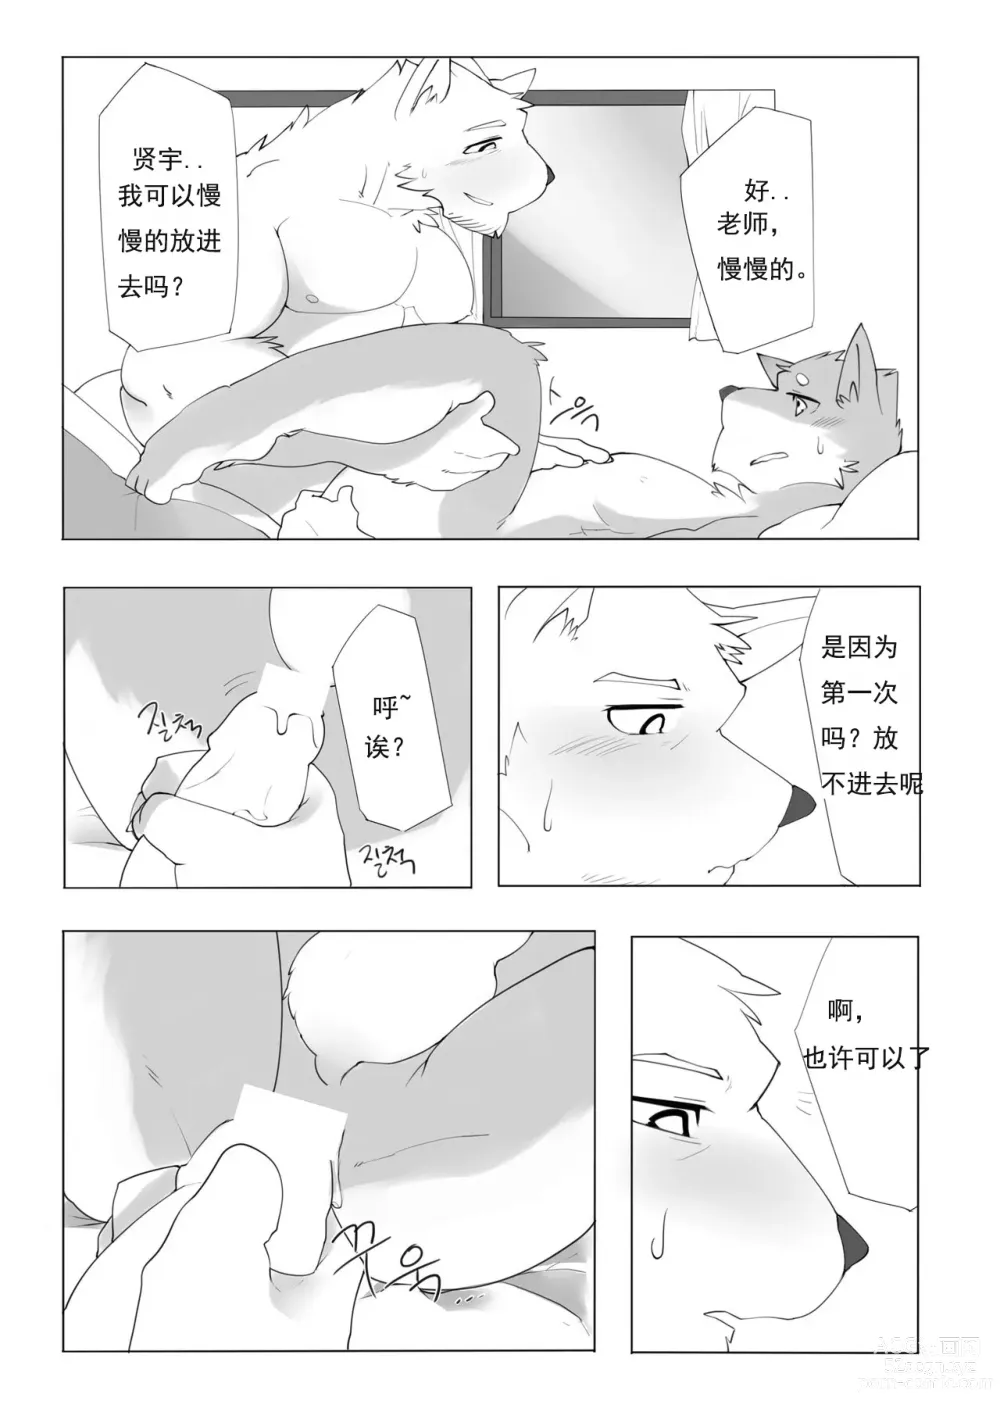 Page 24 of doujinshi 单恋 （工口译制）